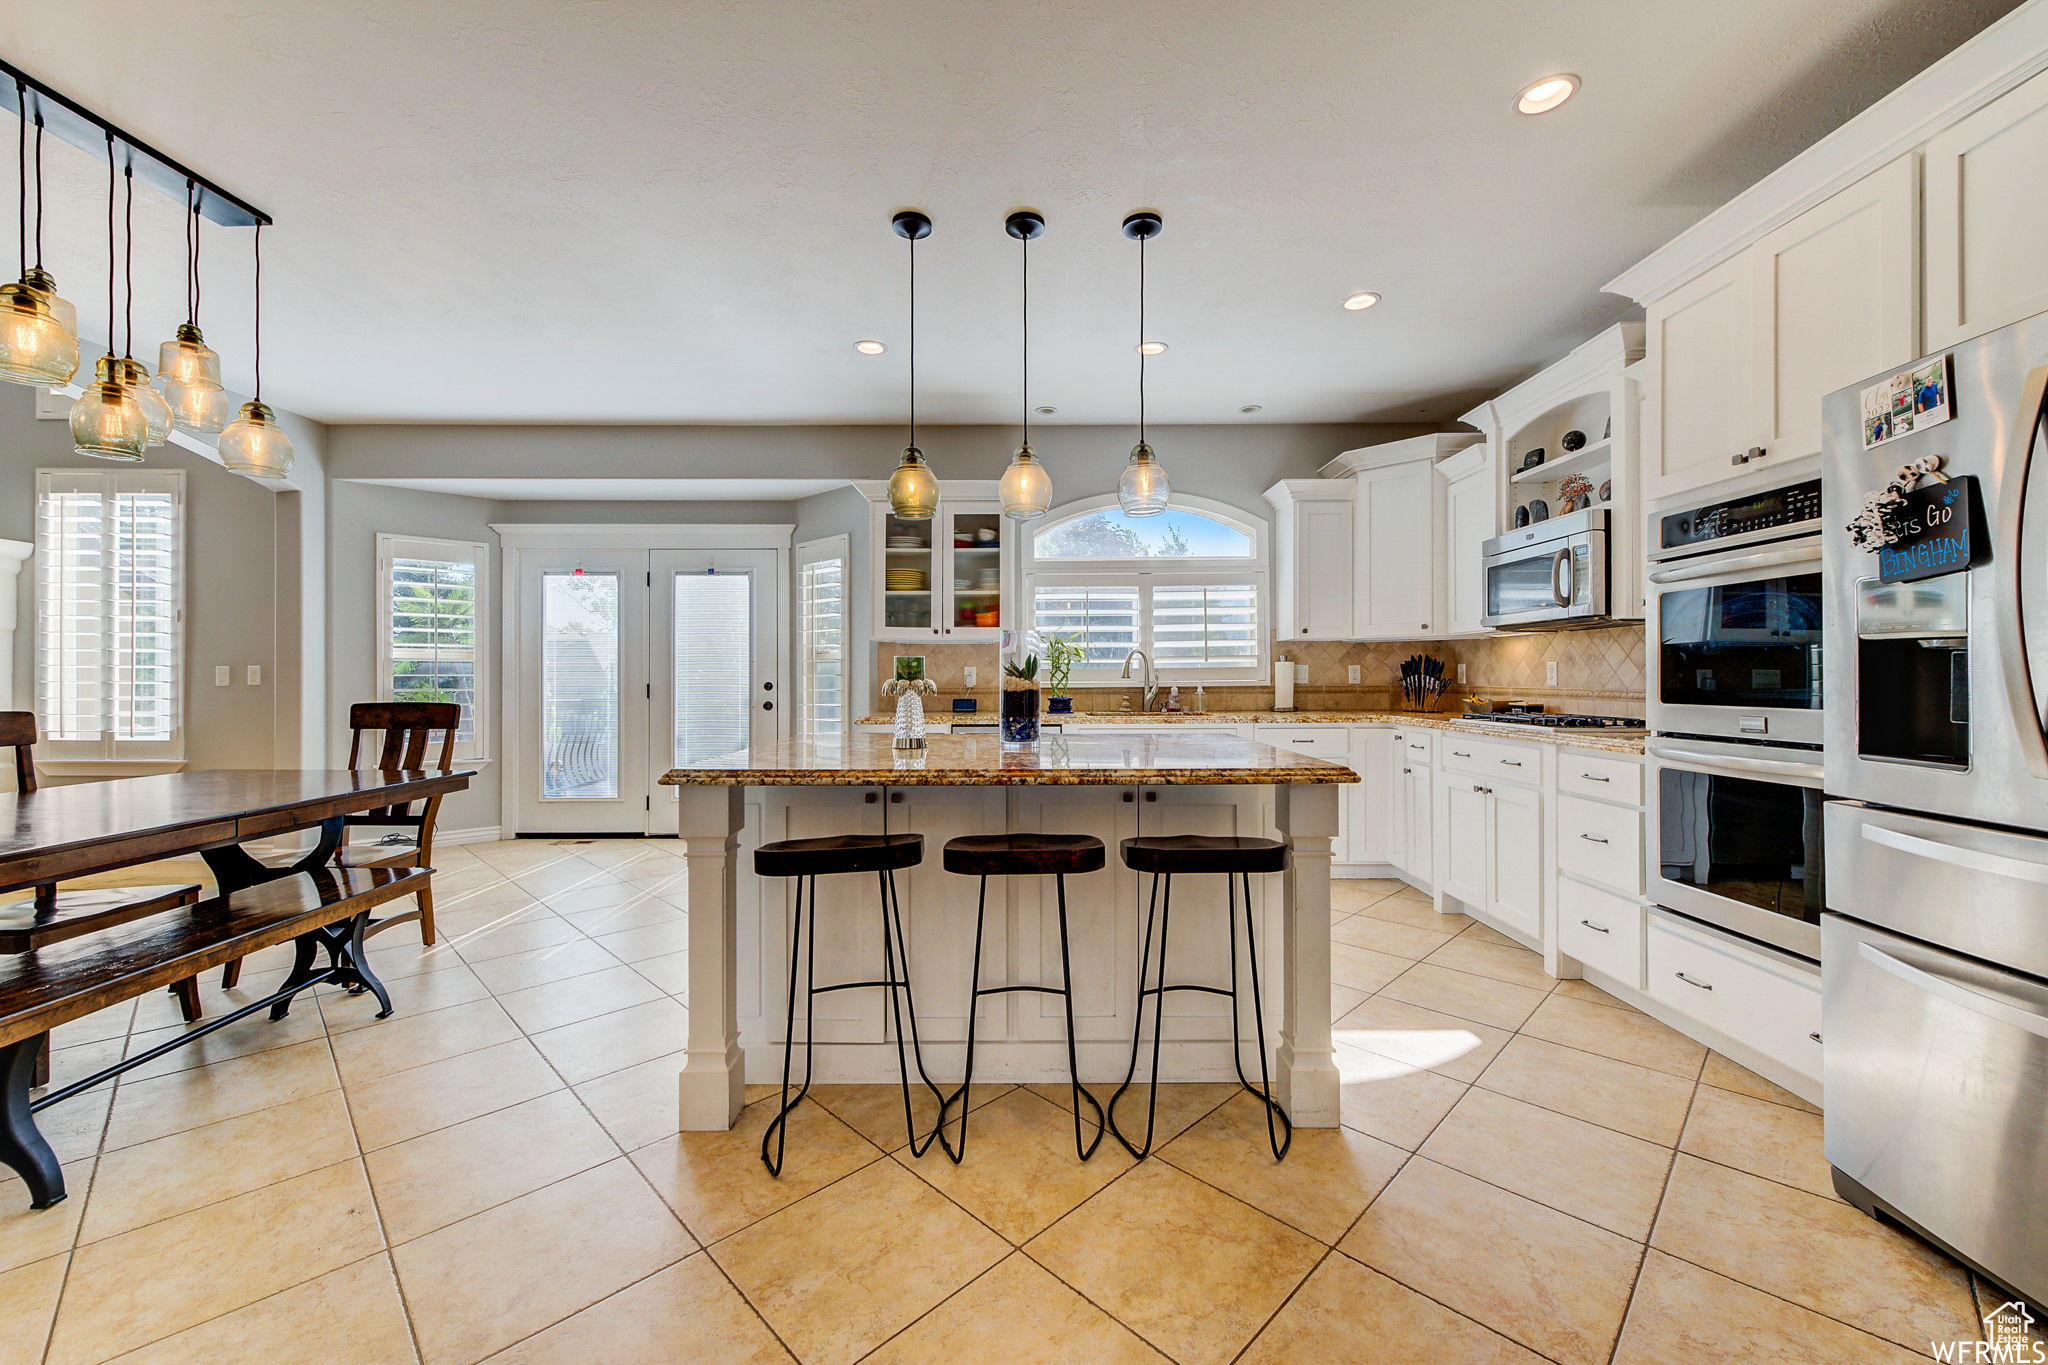 Kitchen featuring white cabinets, a kitchen island, stainless steel appliances, and decorative light fixtures